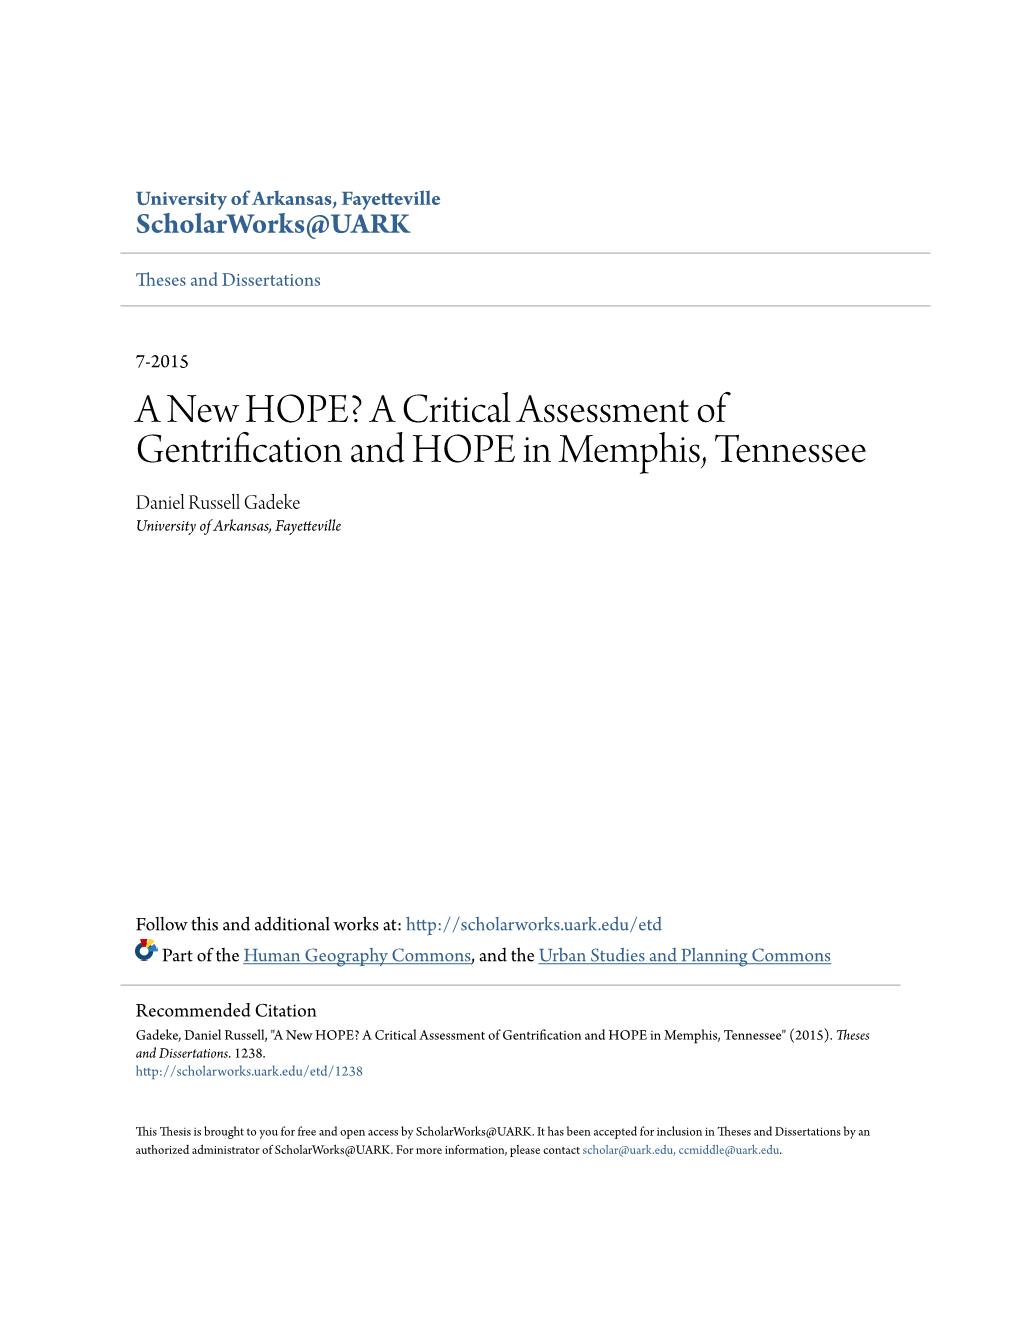 A Critical Assessment of Gentrification and HOPE in Memphis, Tennessee Daniel Russell Gadeke University of Arkansas, Fayetteville